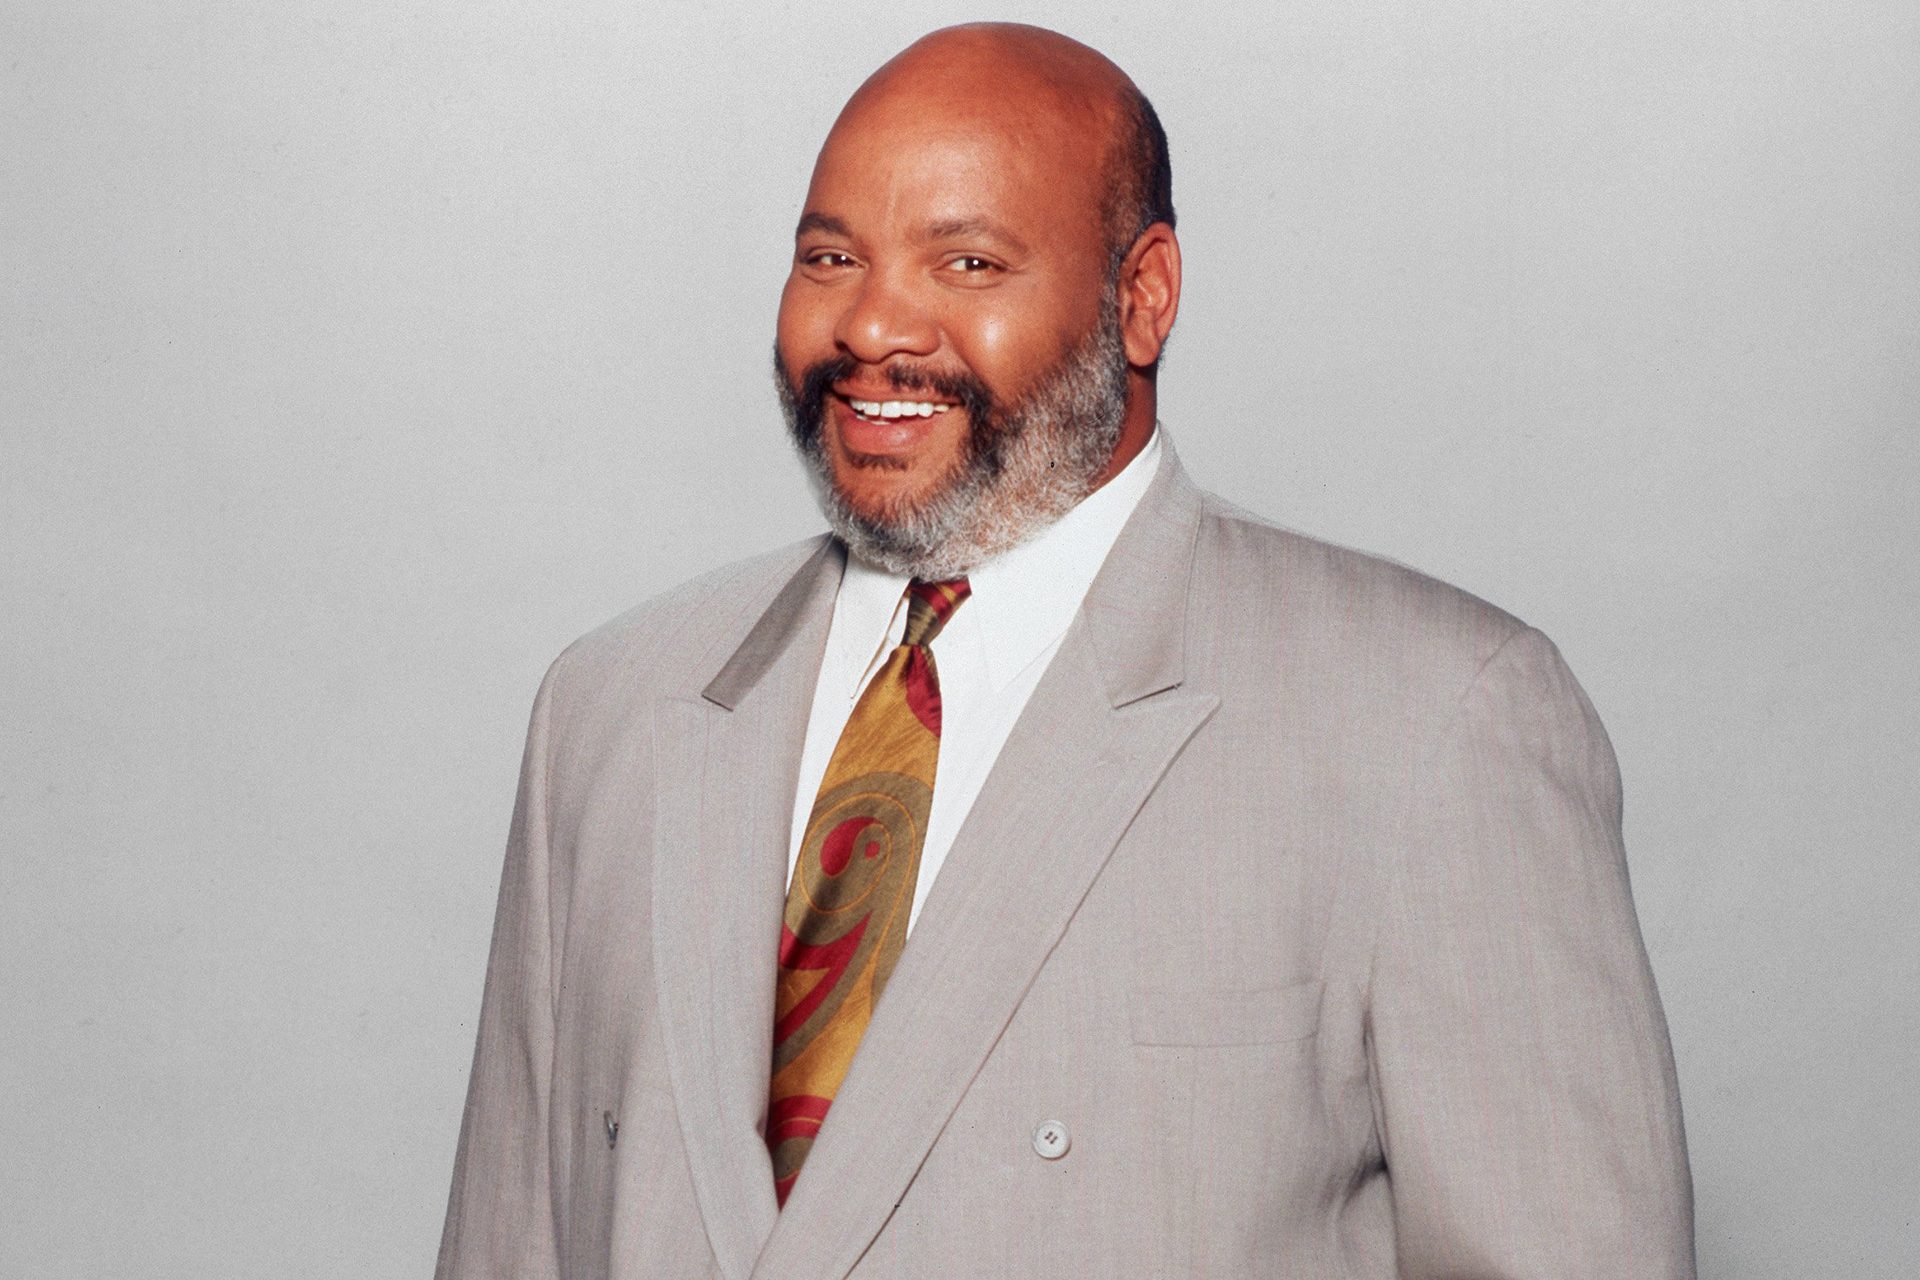 James Avery, best known as Uncle Phil